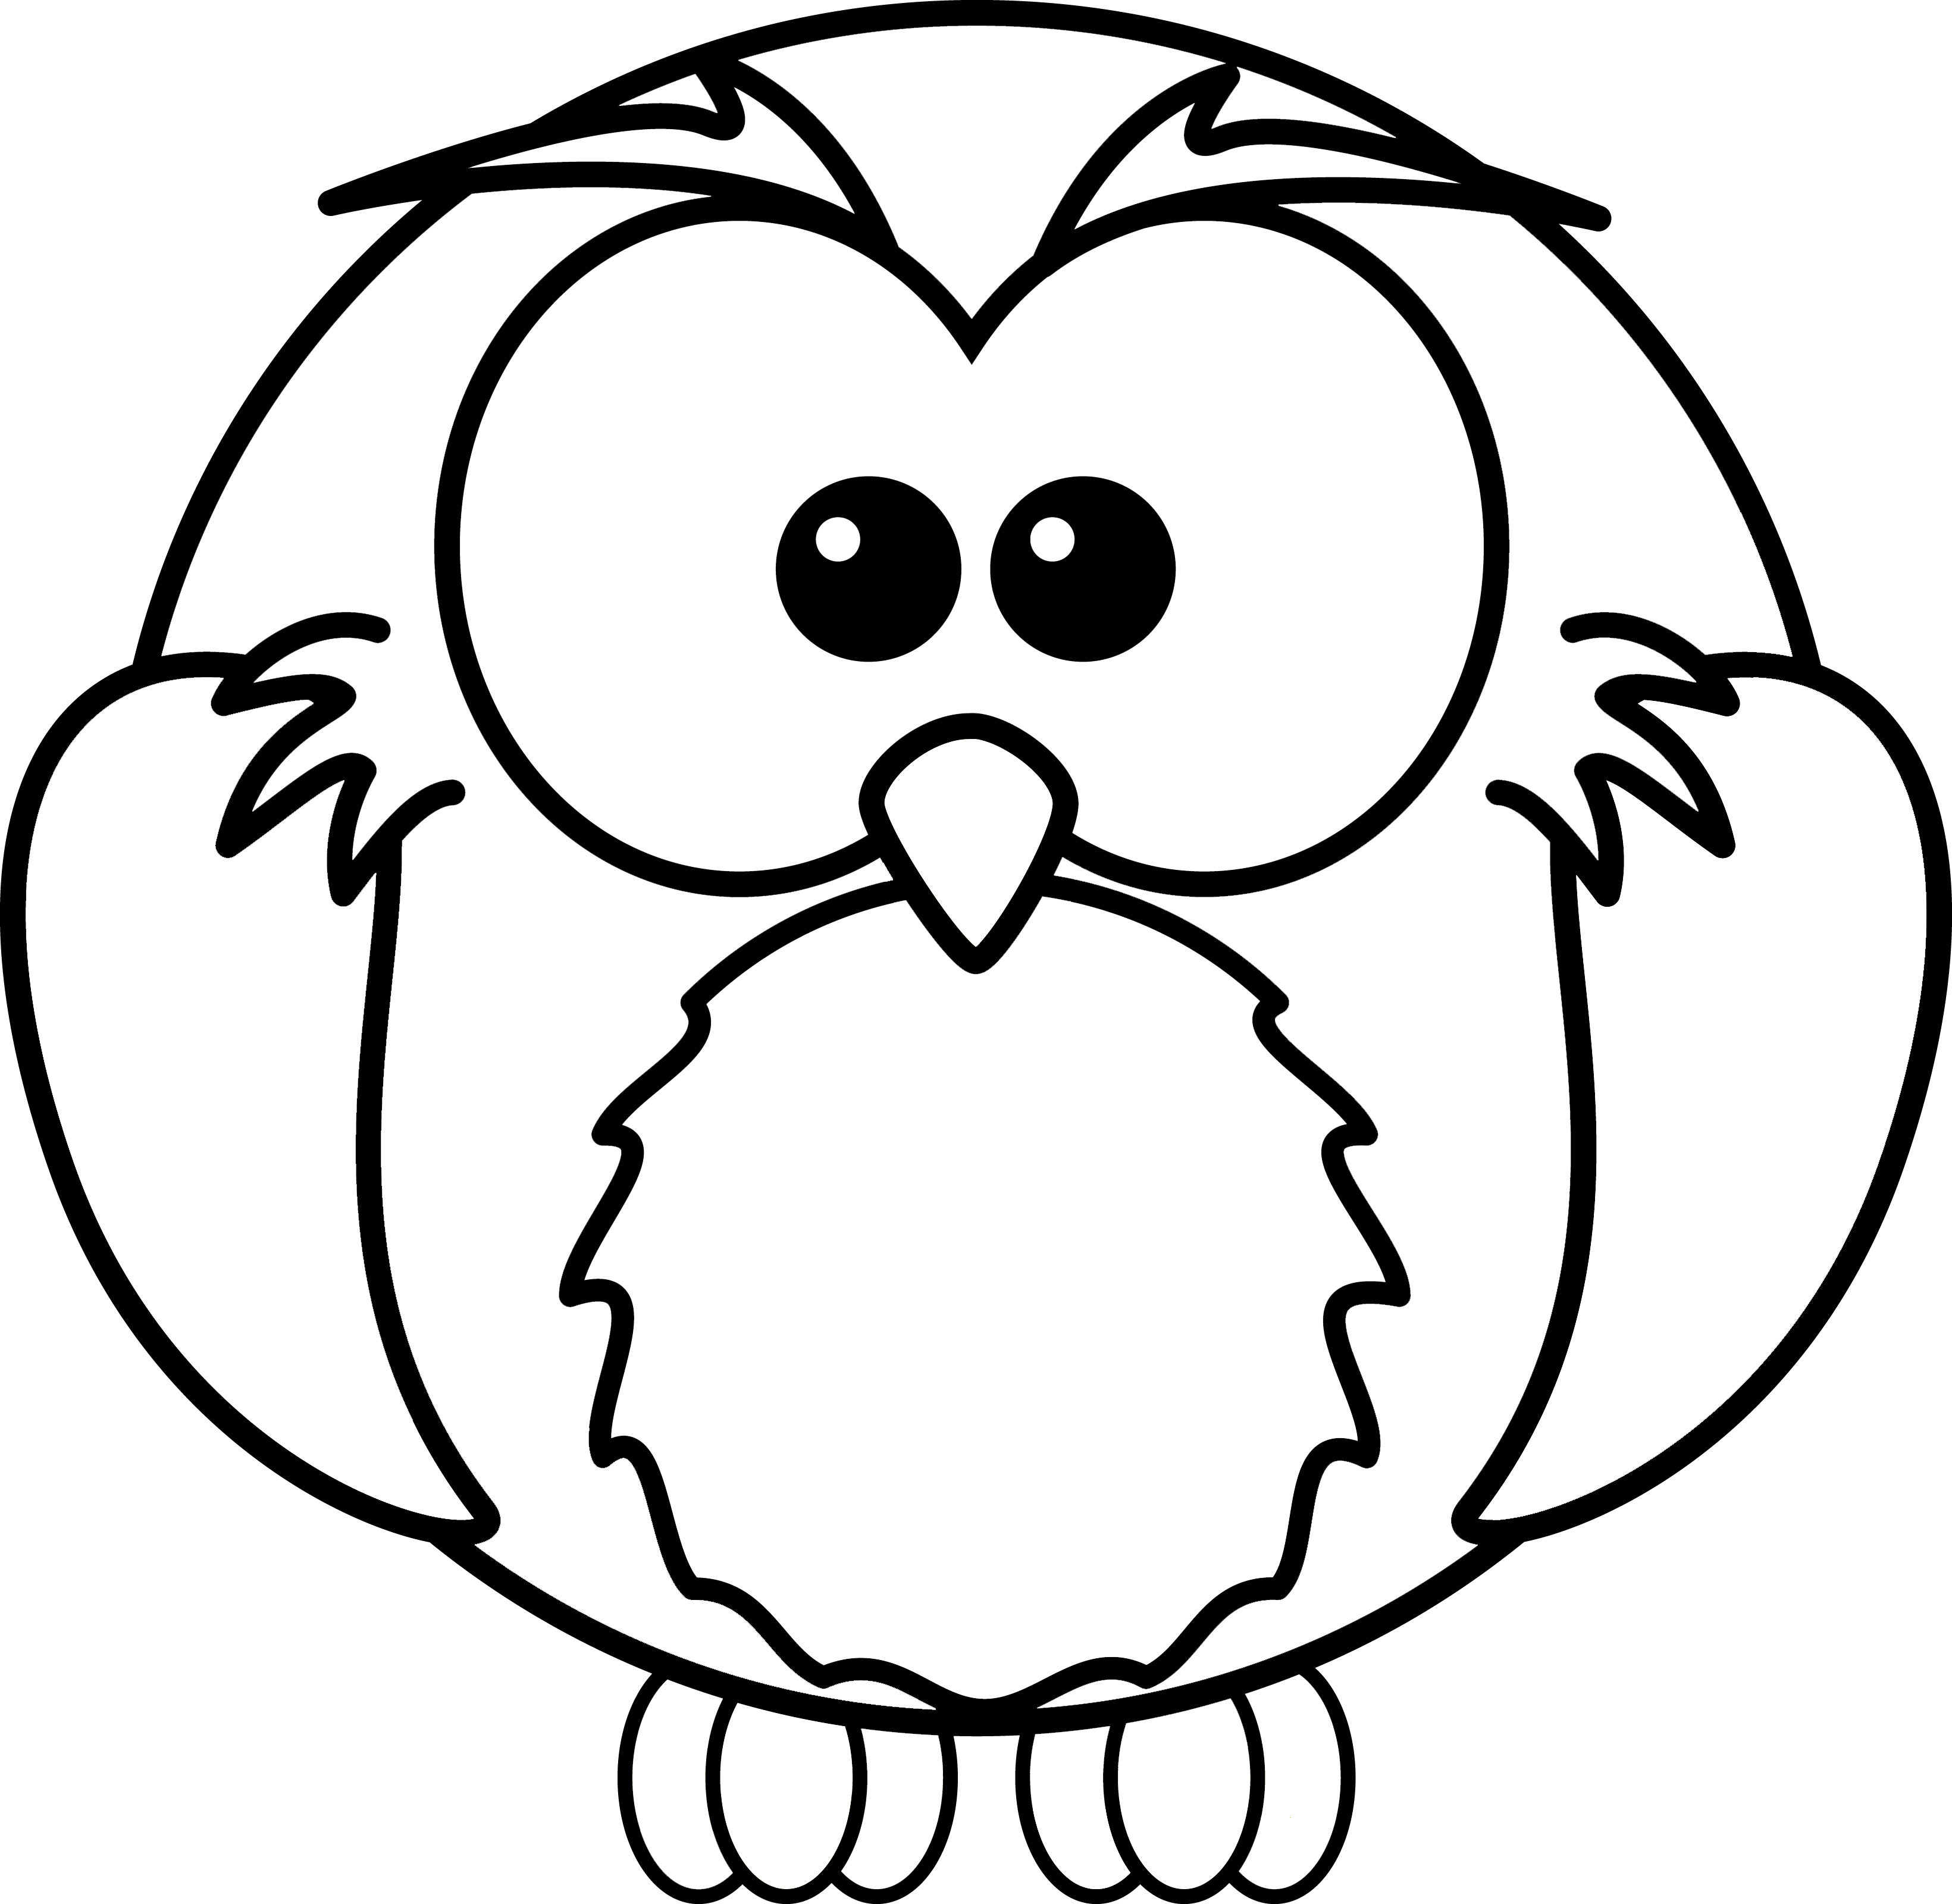 simple-free-printable-owl-template-tank-colouring-pages